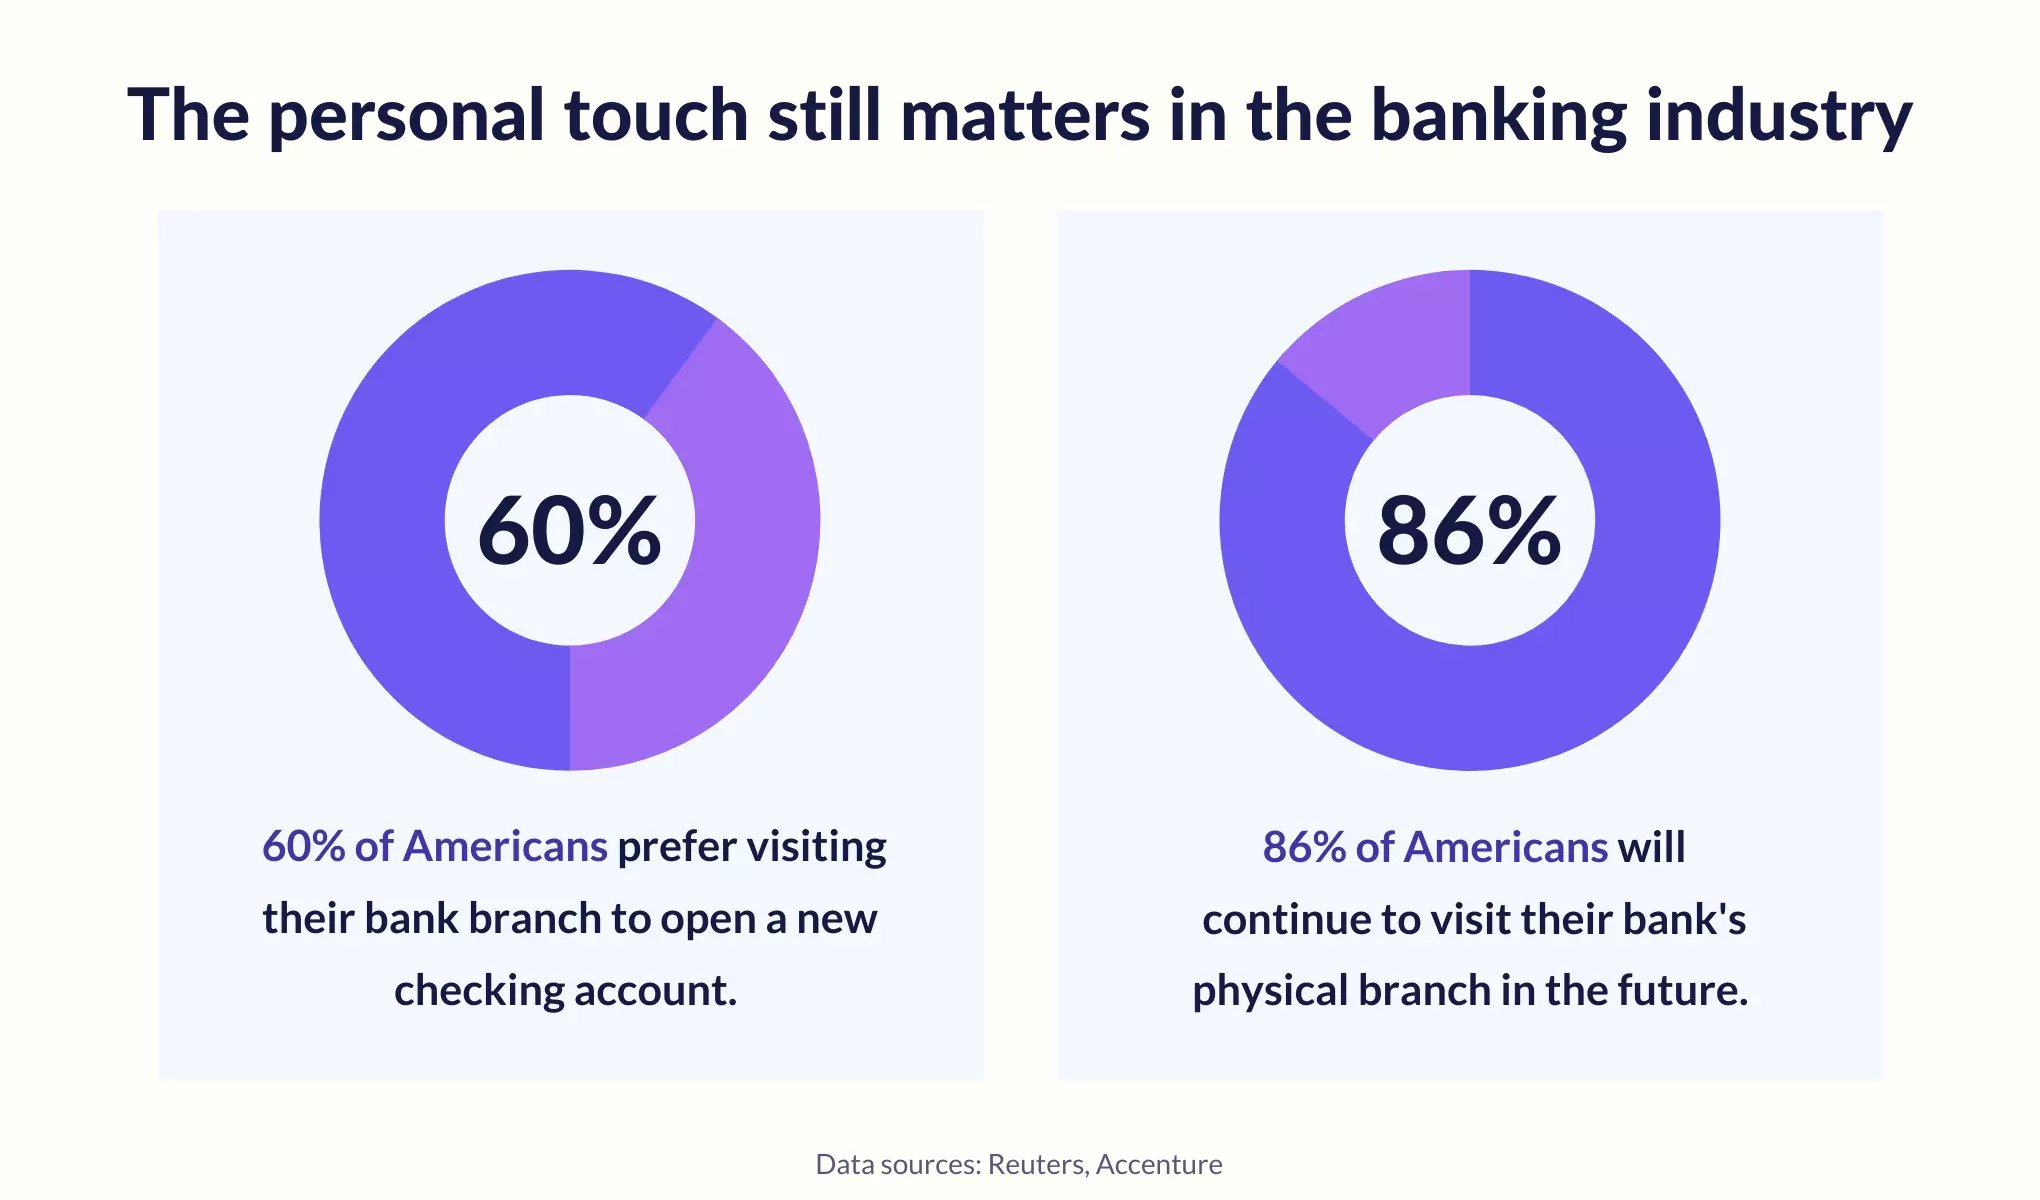 The personal touch in banking